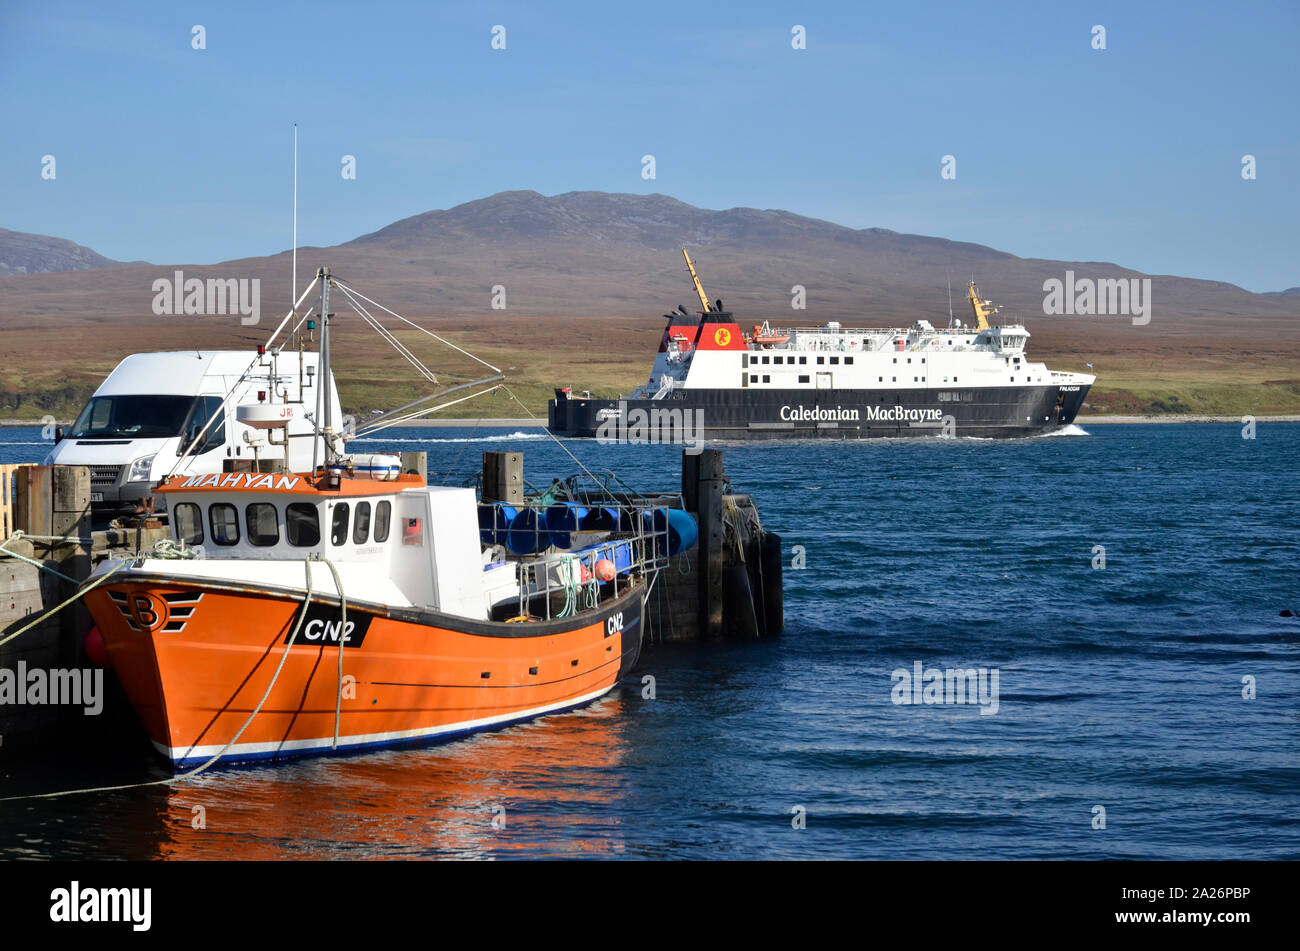 MV Finlaggan, a Caledonian MacBrayne island ferry at Port Askaig on the Scottish Island of Islay. The hills of Jura can be seen in the background. Stock Photo